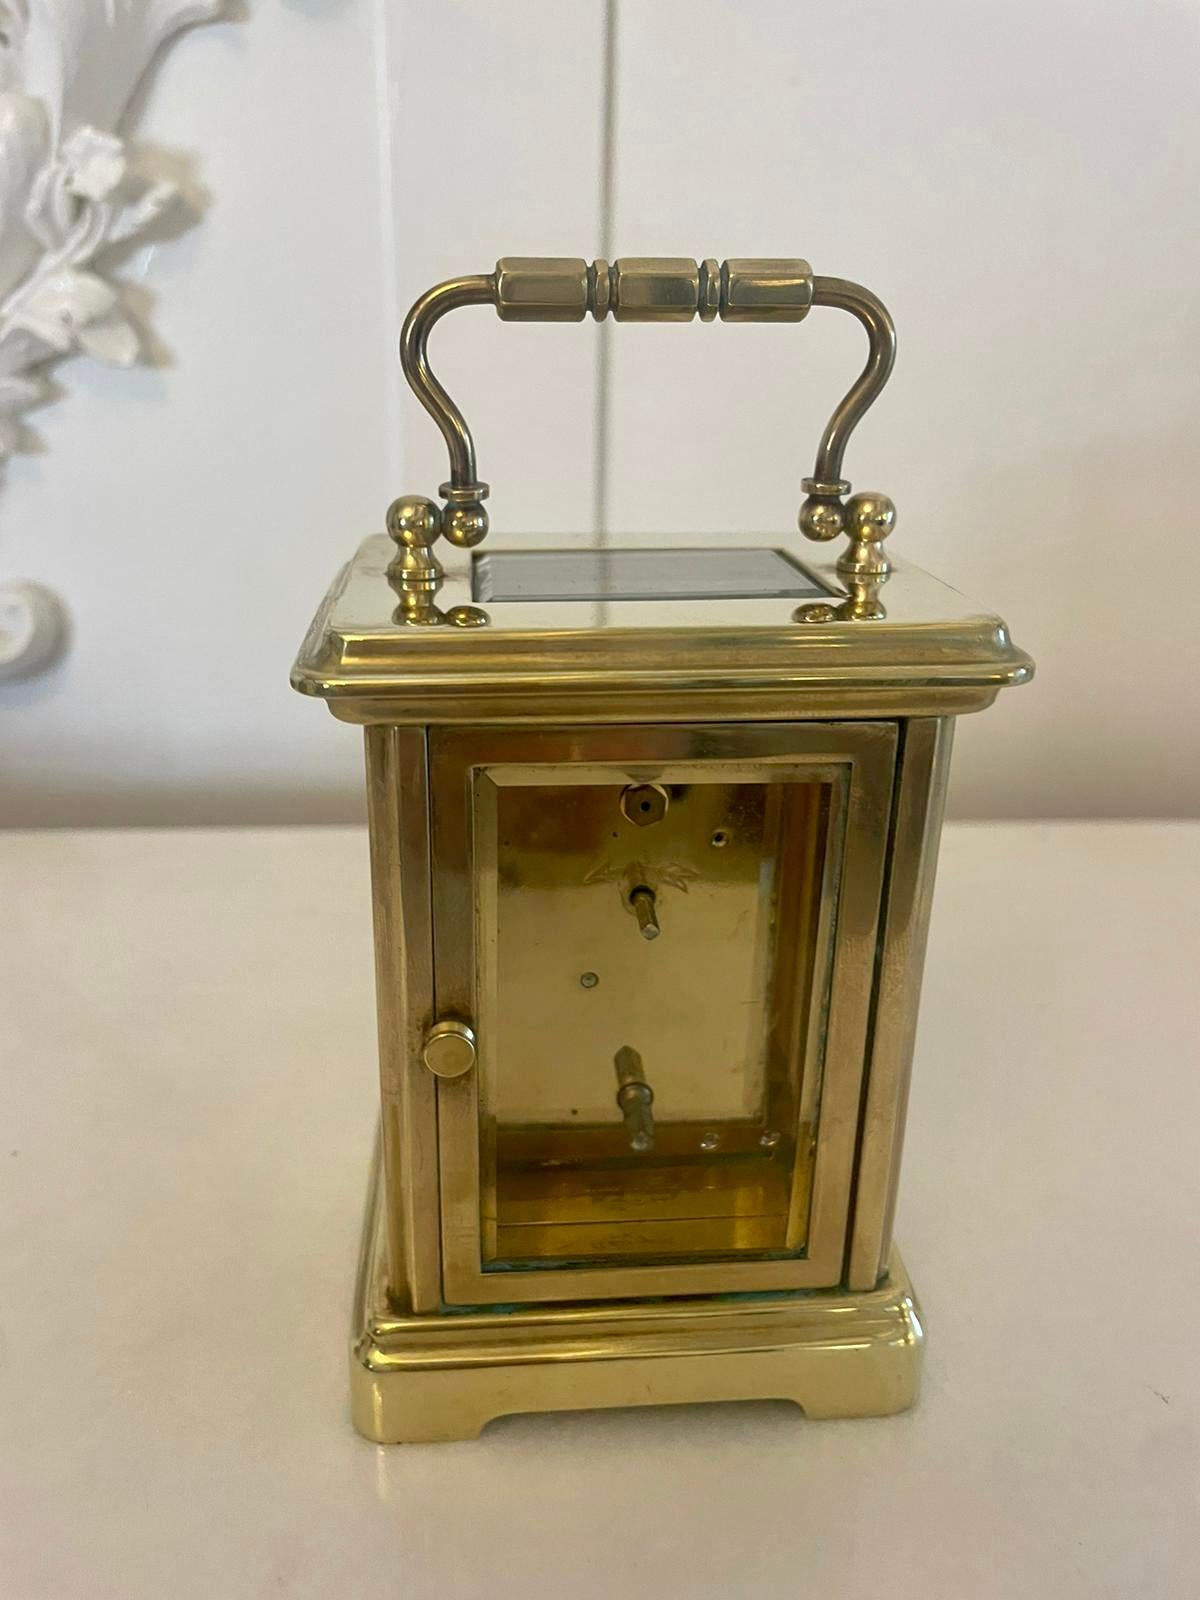 Antique Edwardian quality brass carriage clock having a quality brass carriage clock with bevelled edge glass panels, 8 day movement and a shaped carrying handle to the top


In good working order


Dimensions:
Height 14.5 cm (5.70 in)
Width 8 cm